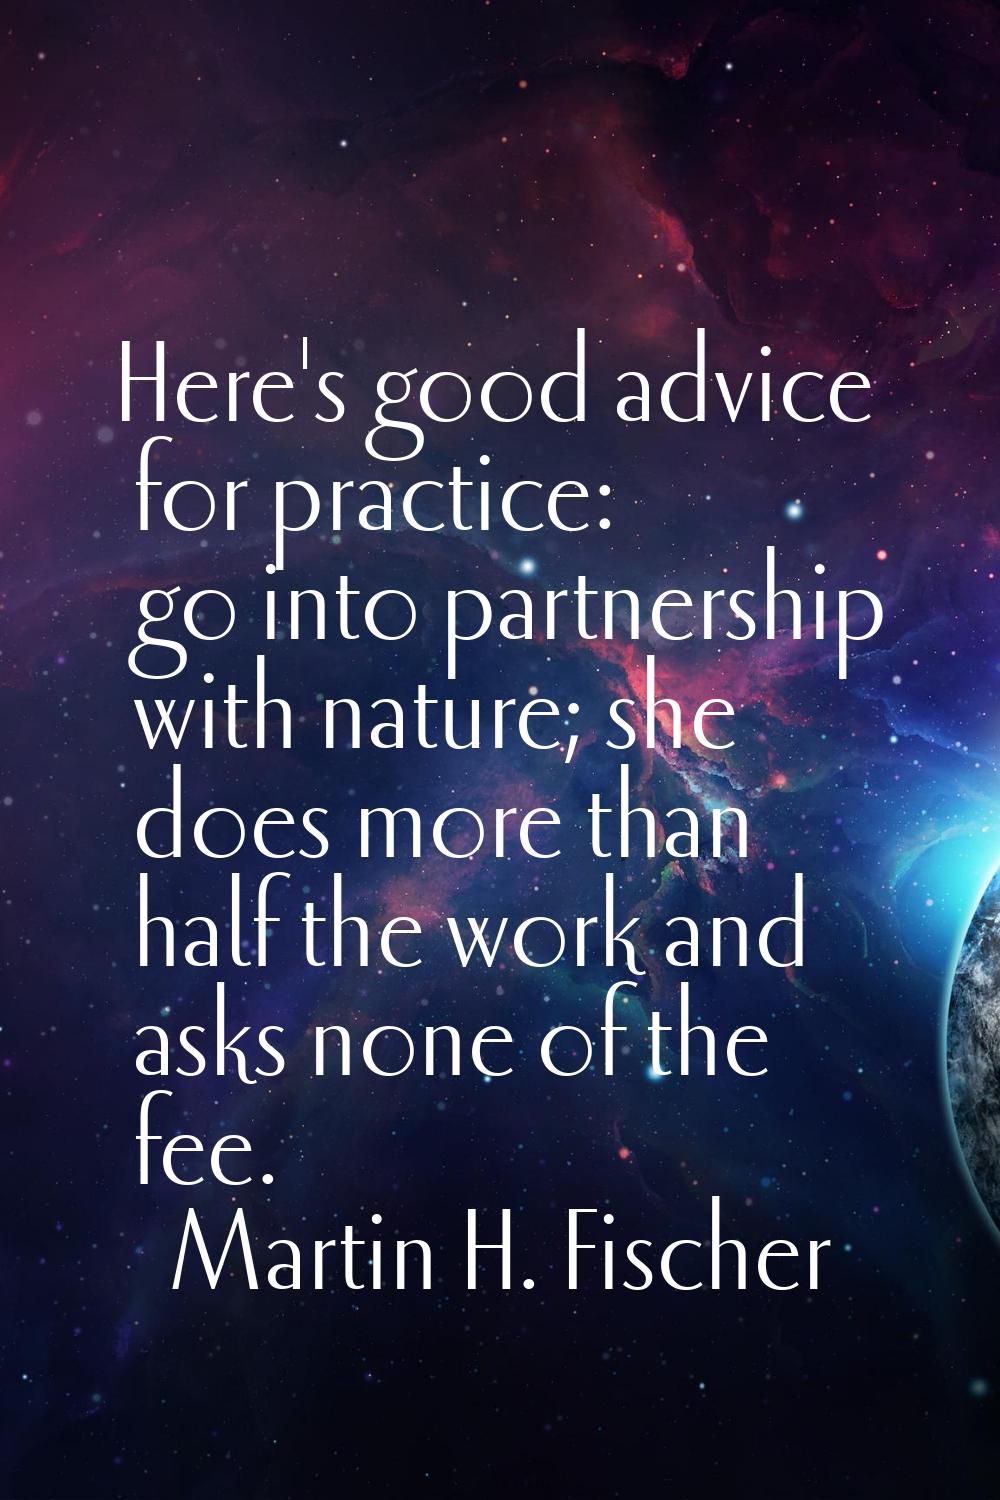 Here's good advice for practice: go into partnership with nature; she does more than half the work 